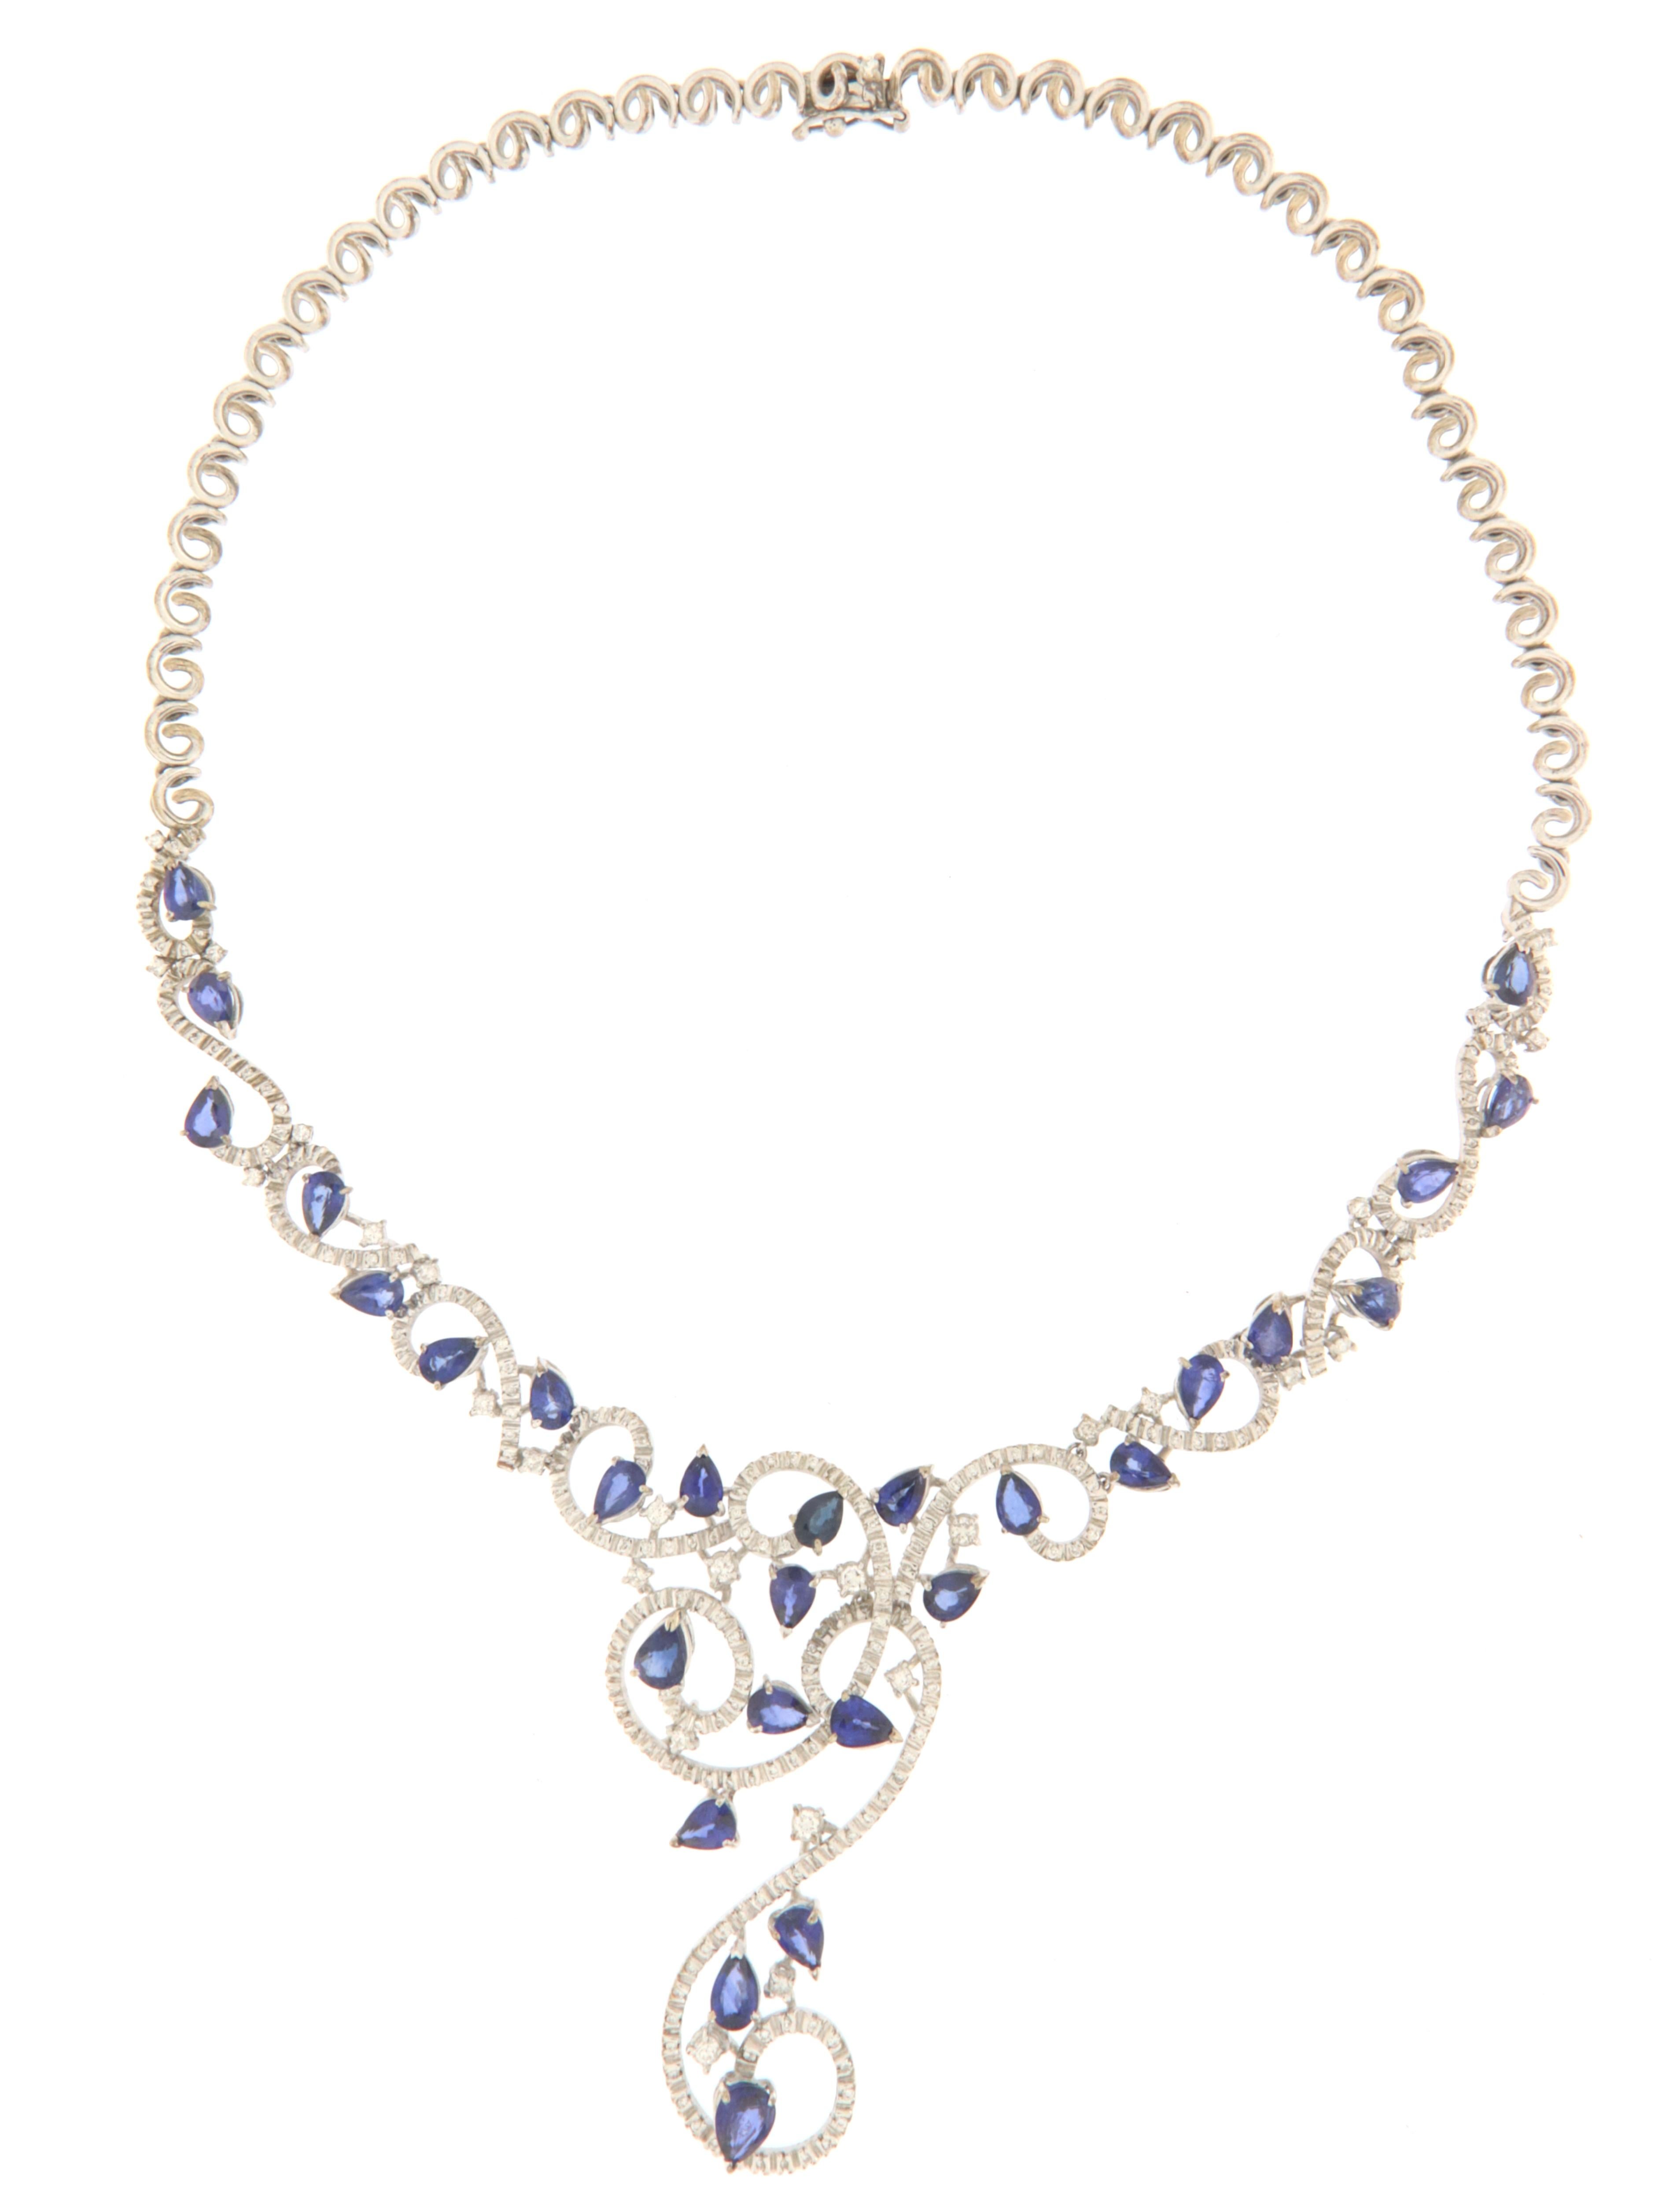 Spectacular 18 carat white gold choker necklace to wear for important events, the necklace is made up of natural sapphire drops and there are also many natural diamonds set.
Handcrafted by famous southern Italian jewelers

Sapphires weight 13.87